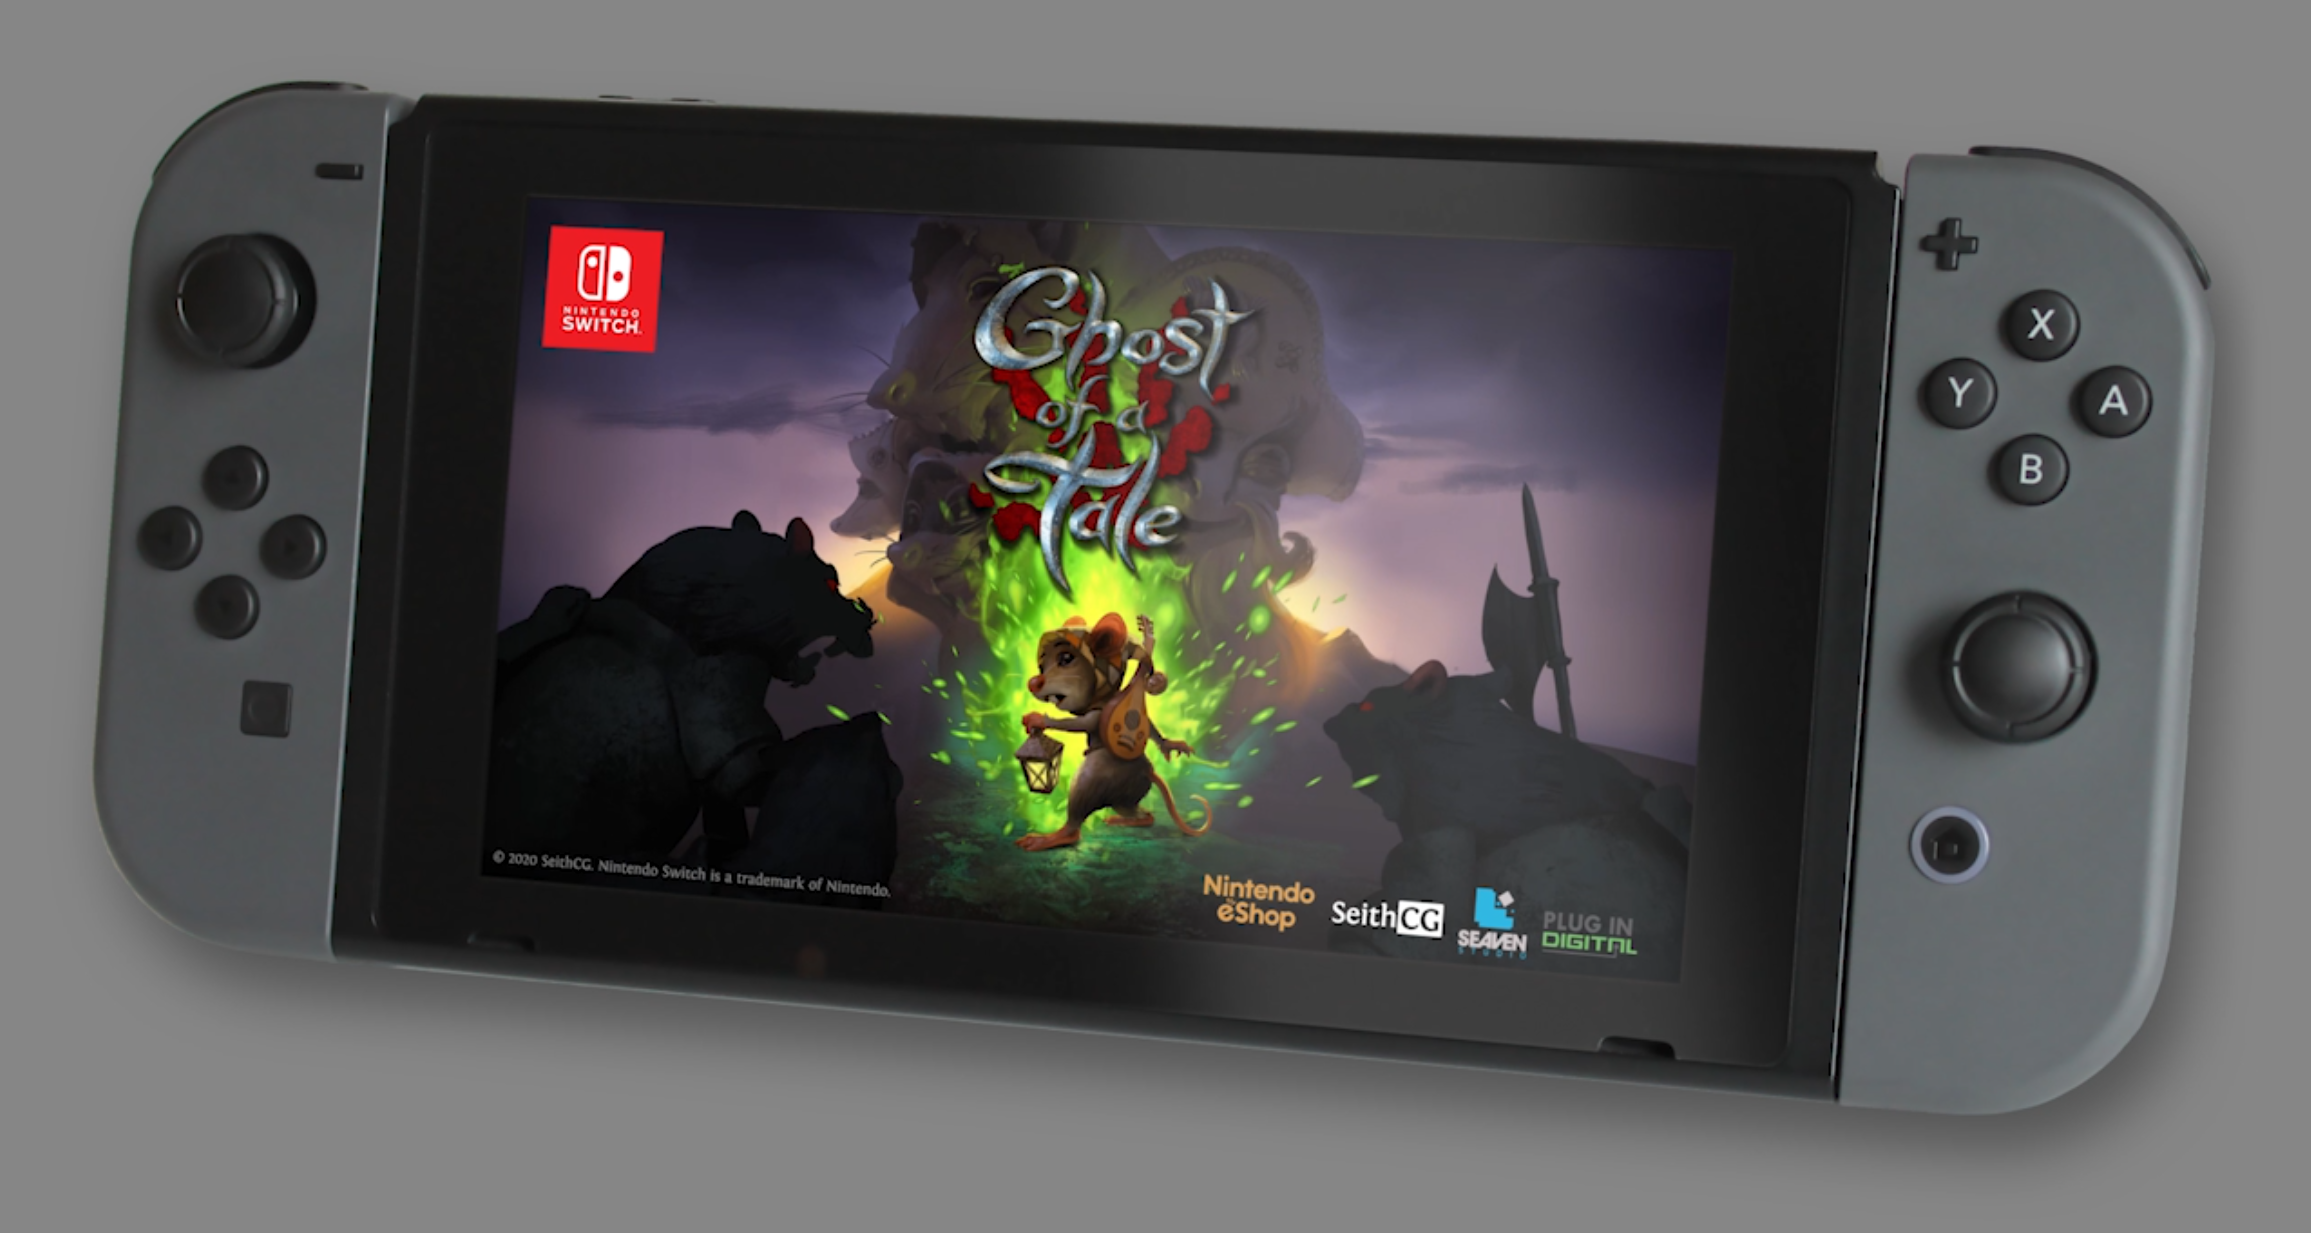 Nintendo: eShop Colombia, Ghost of a Tale